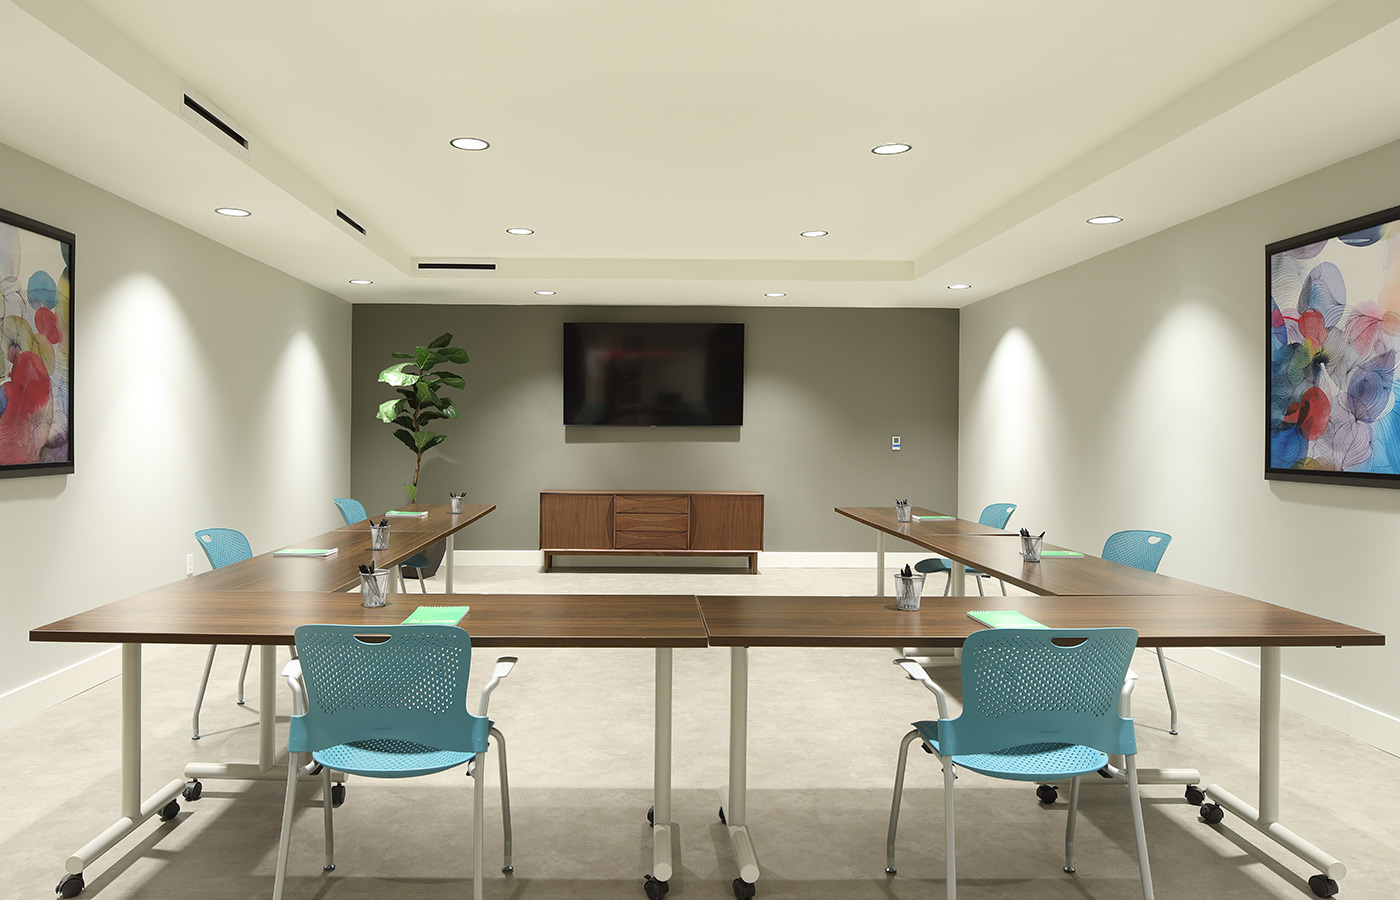 A conference room with a table, chairs, and monitor on the wall.